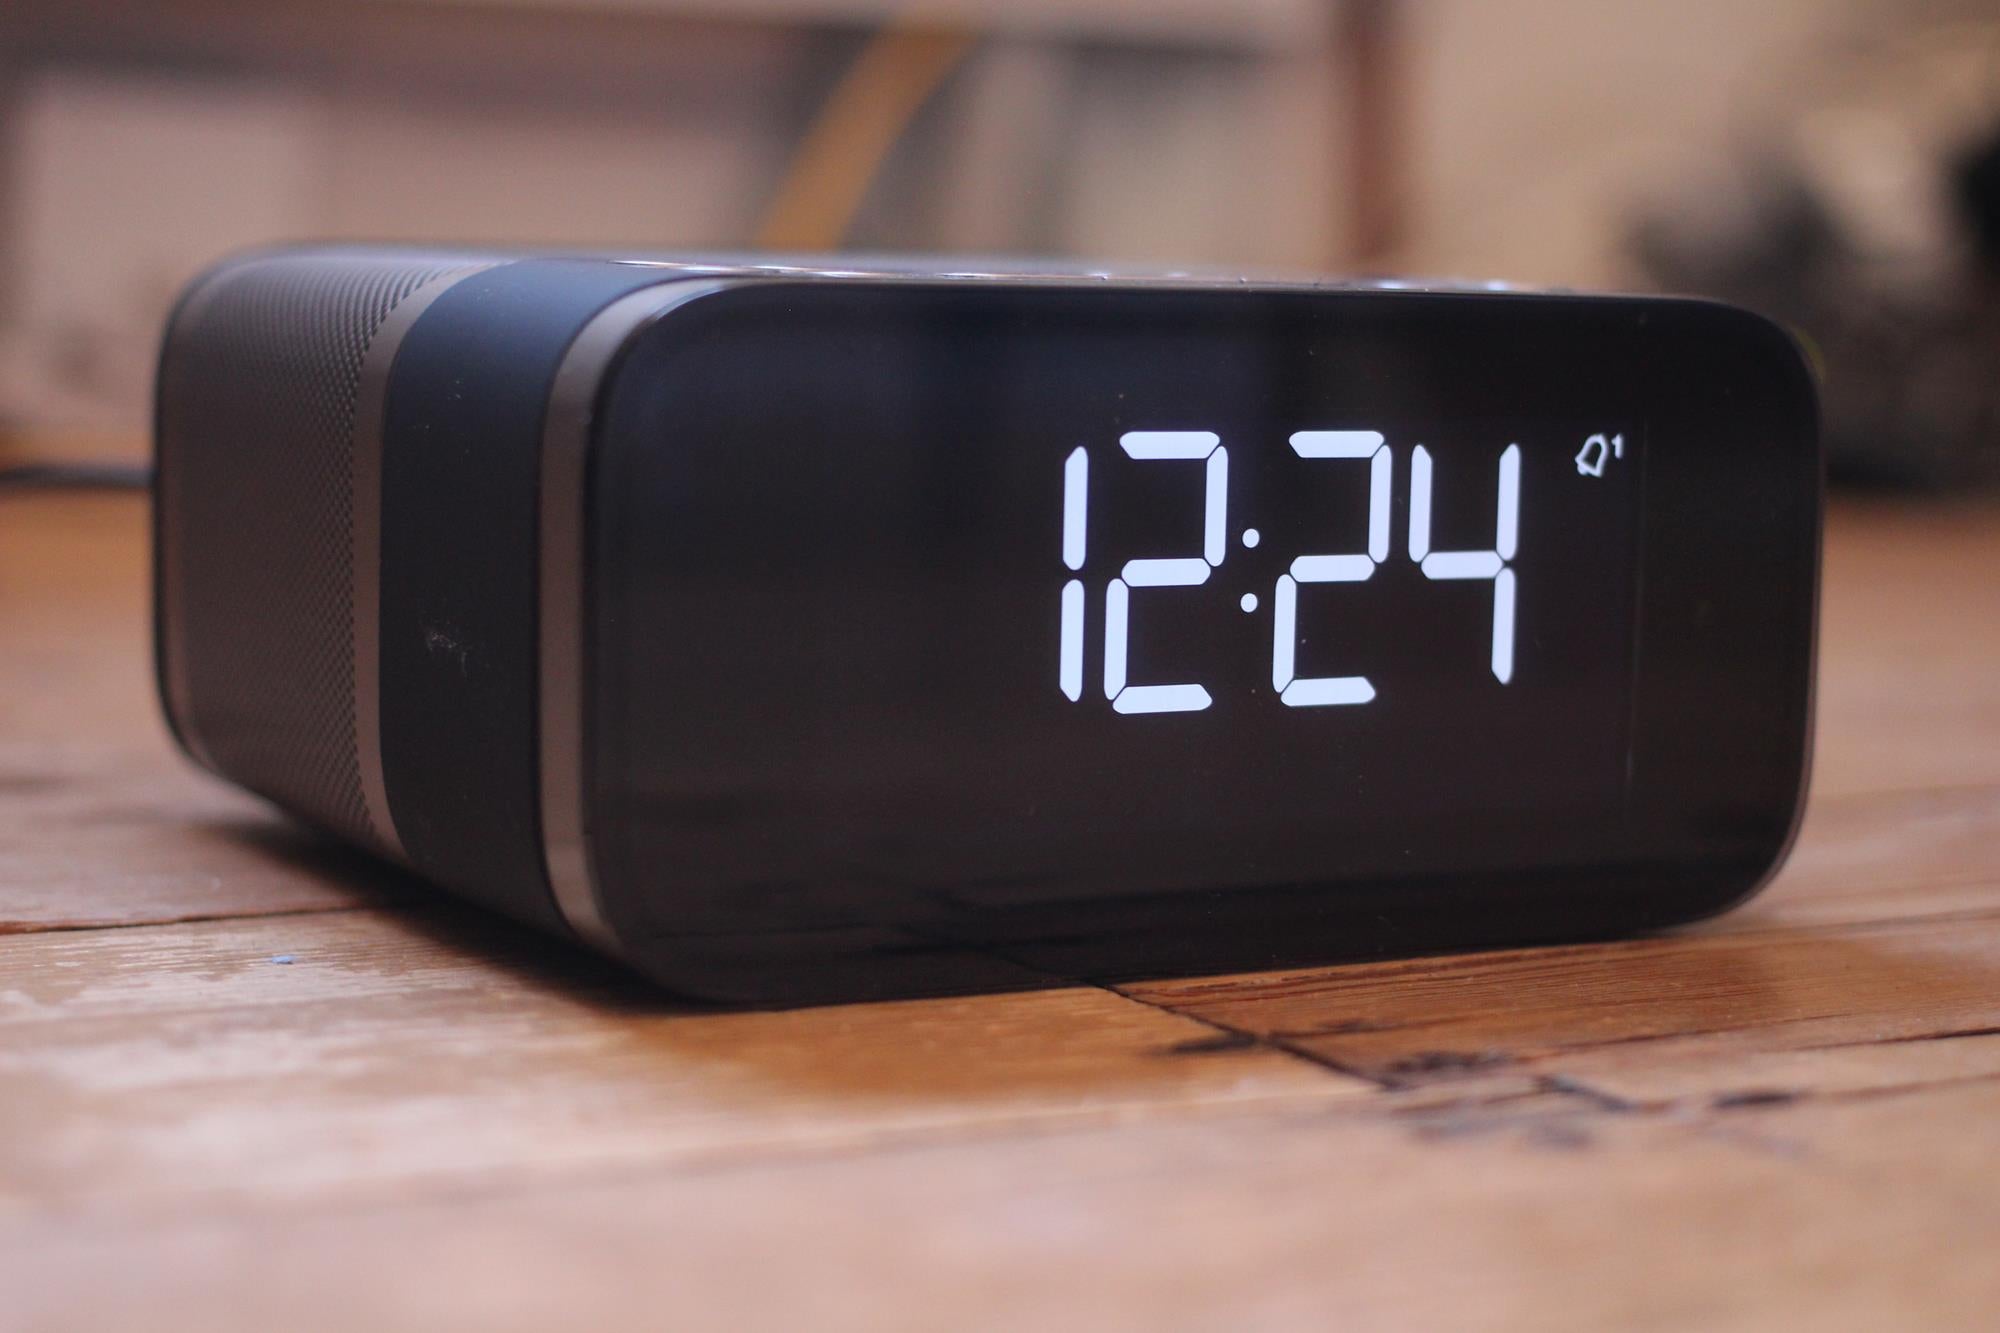 Pure Siesta S6 alarm clock displaying time on wooden surface